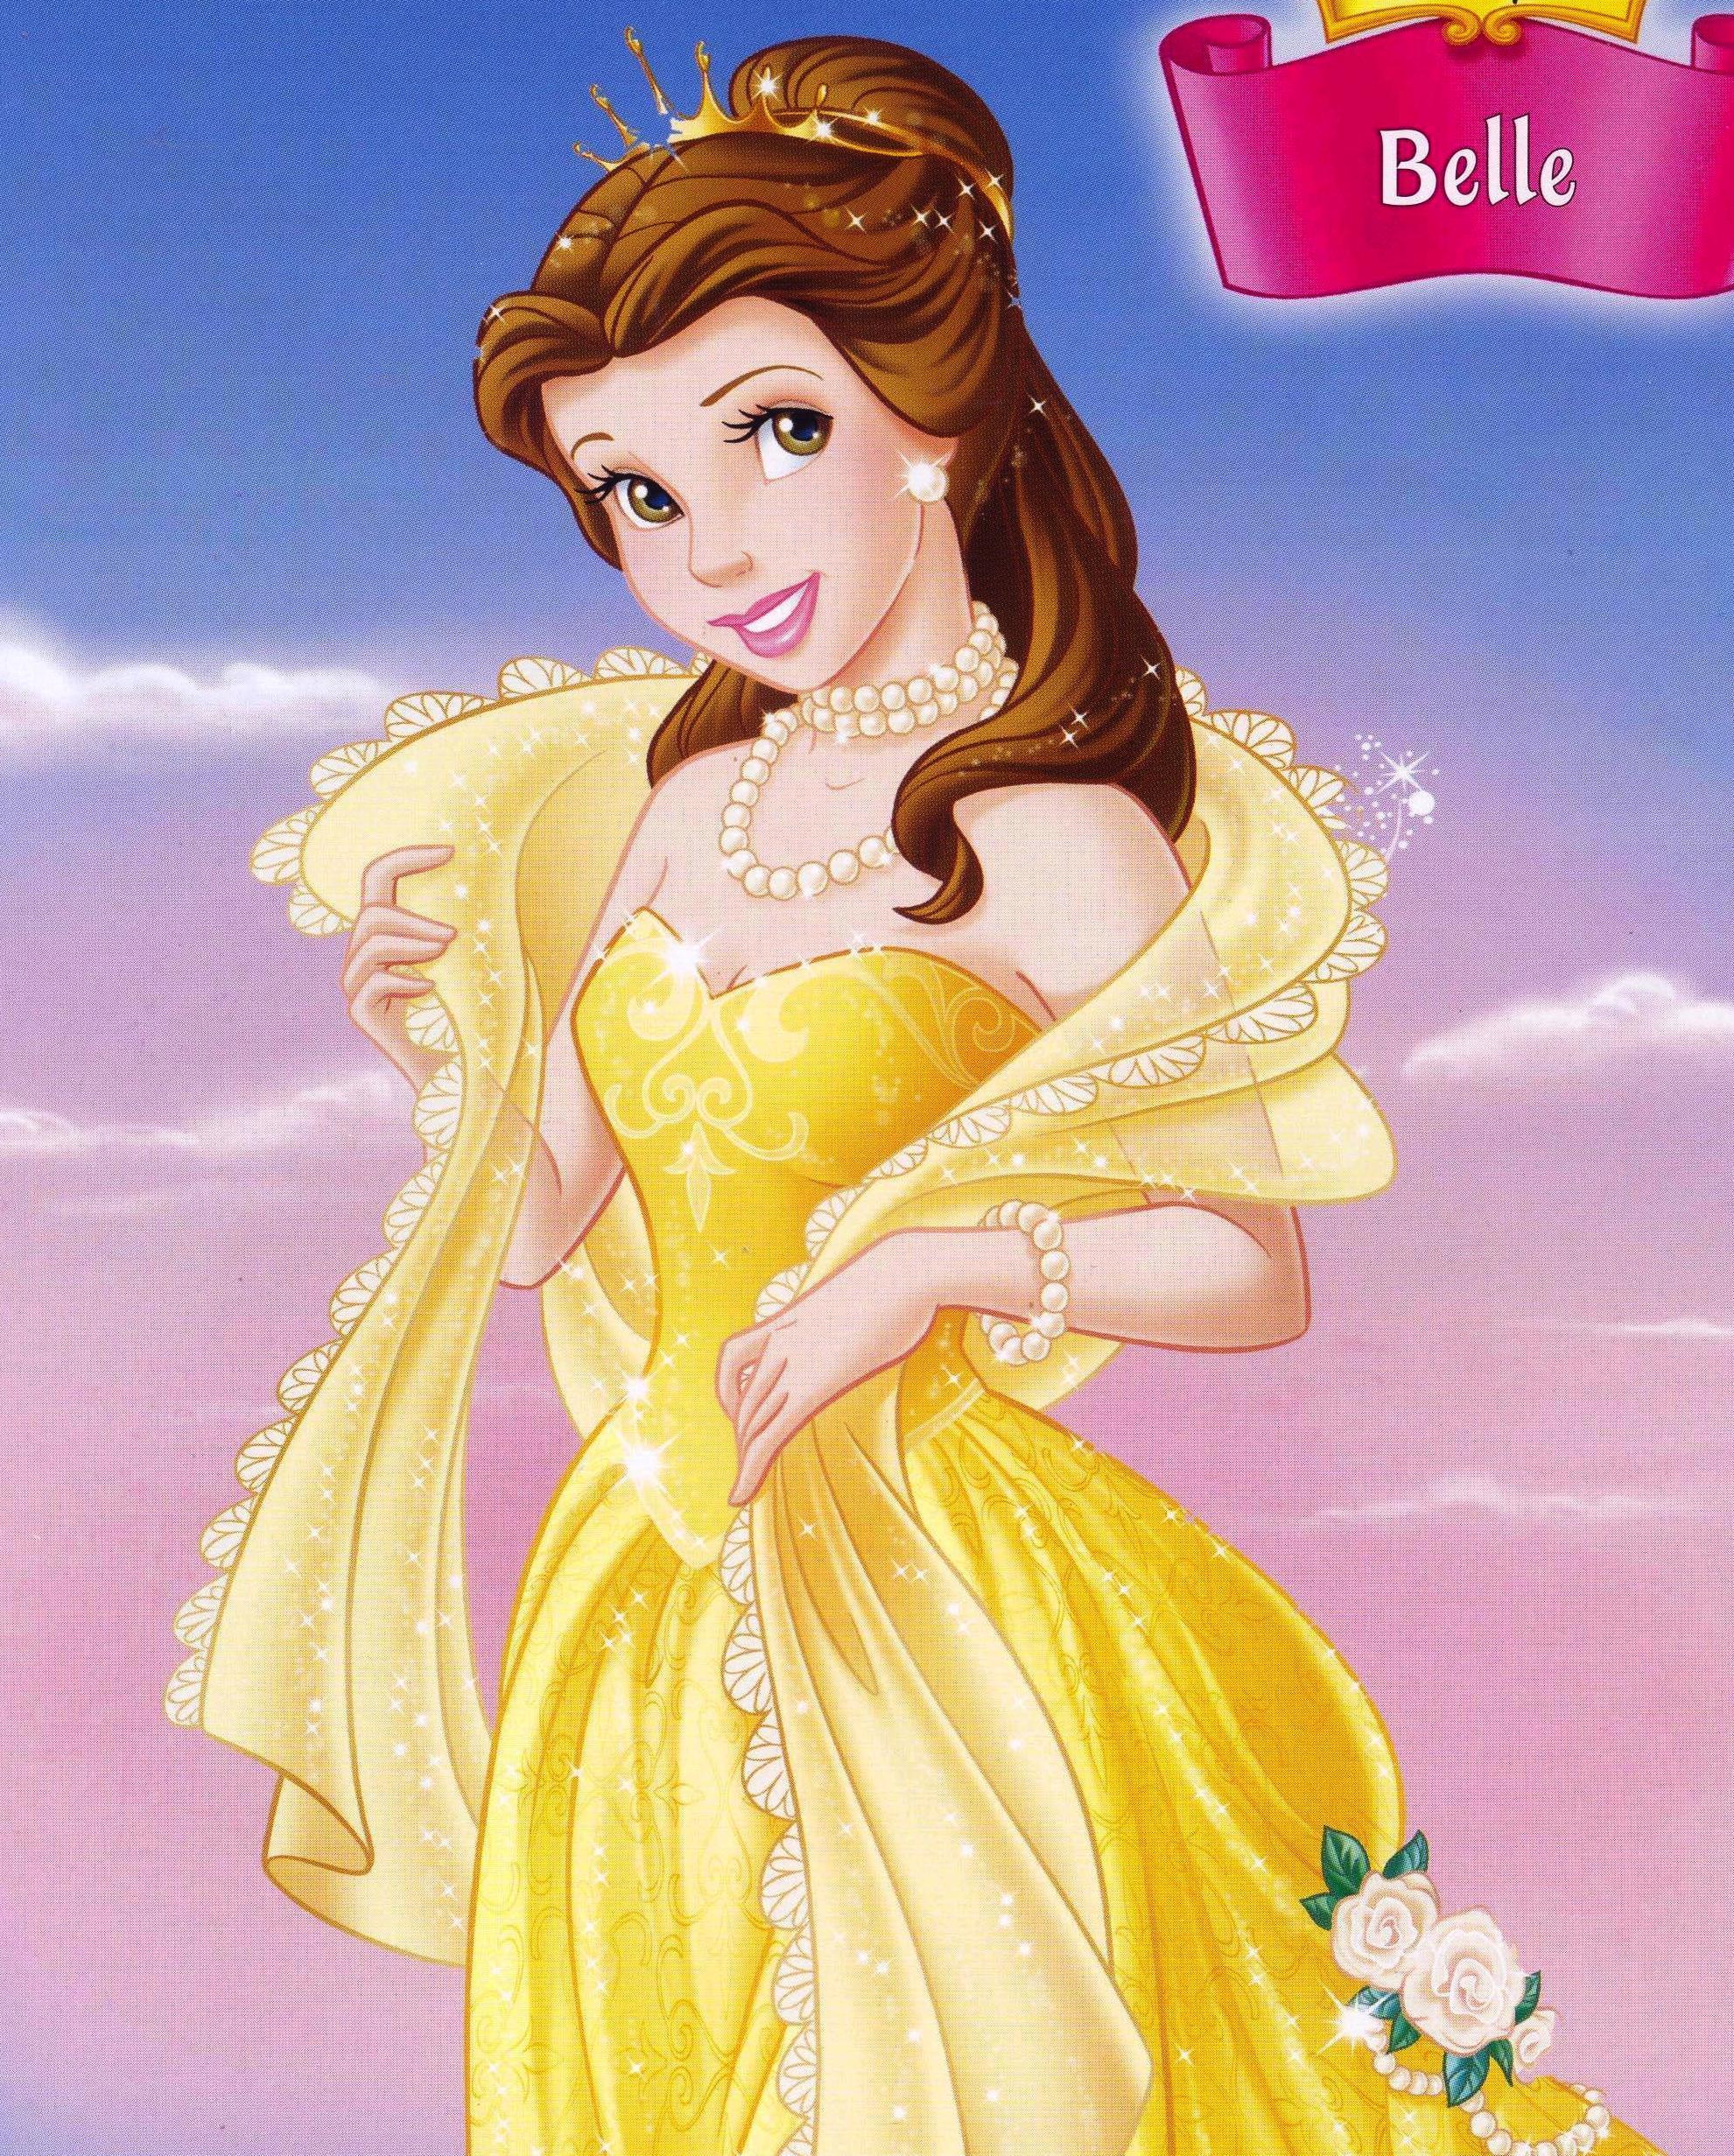 Albums 93+ Wallpaper Belle's Room Beauty And The Beast Excellent